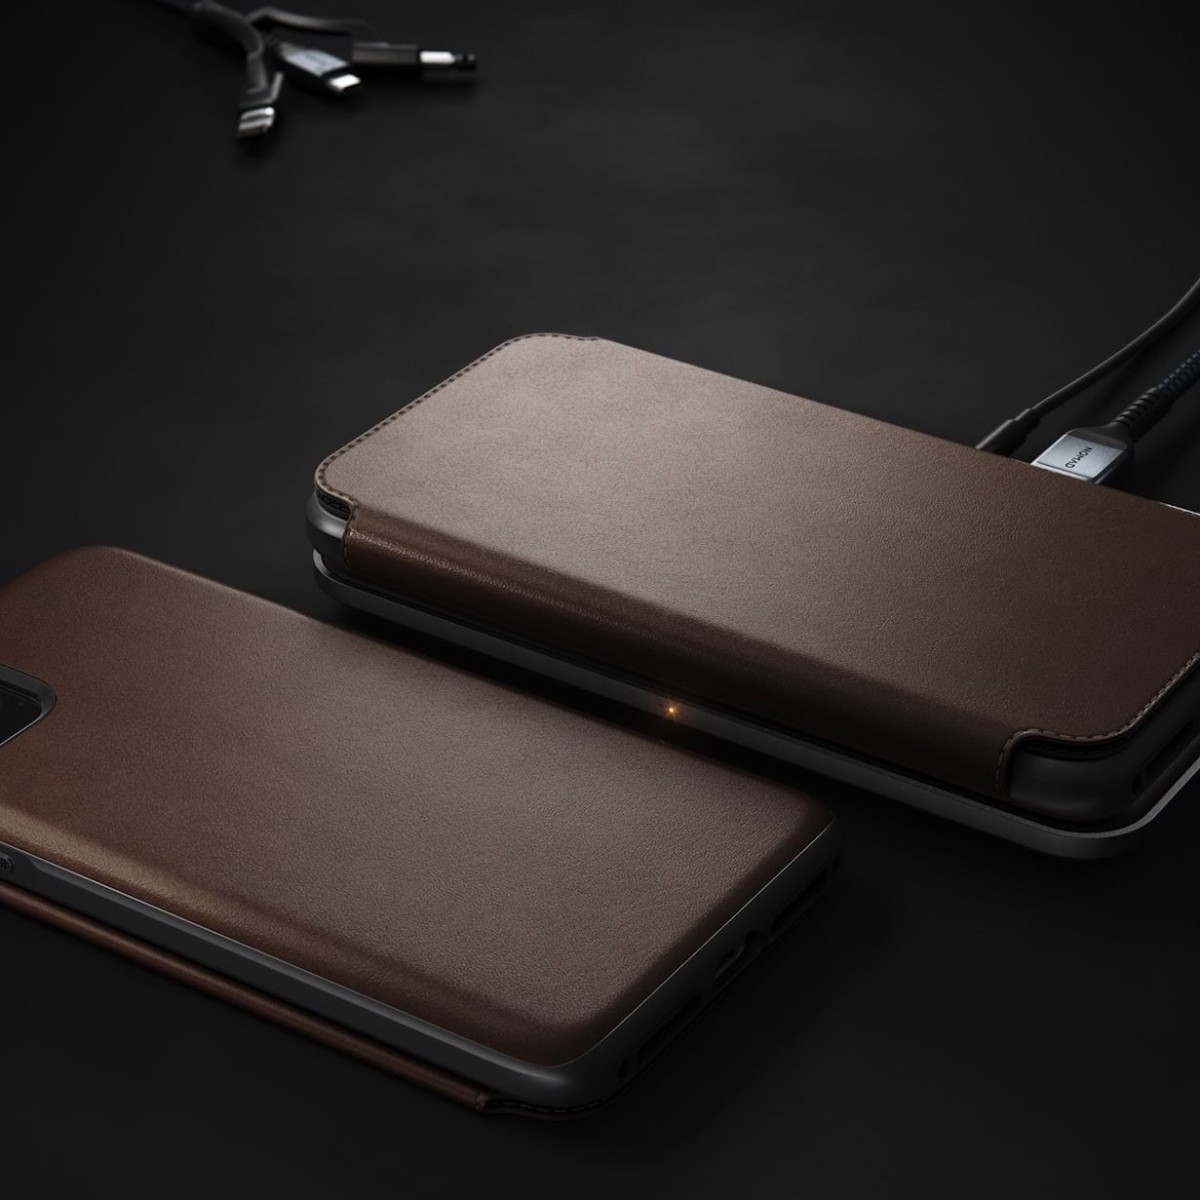 Nomad Rugged Folio Horween Leather iPhone 11 Pro Max Case offers all-angle drop protection